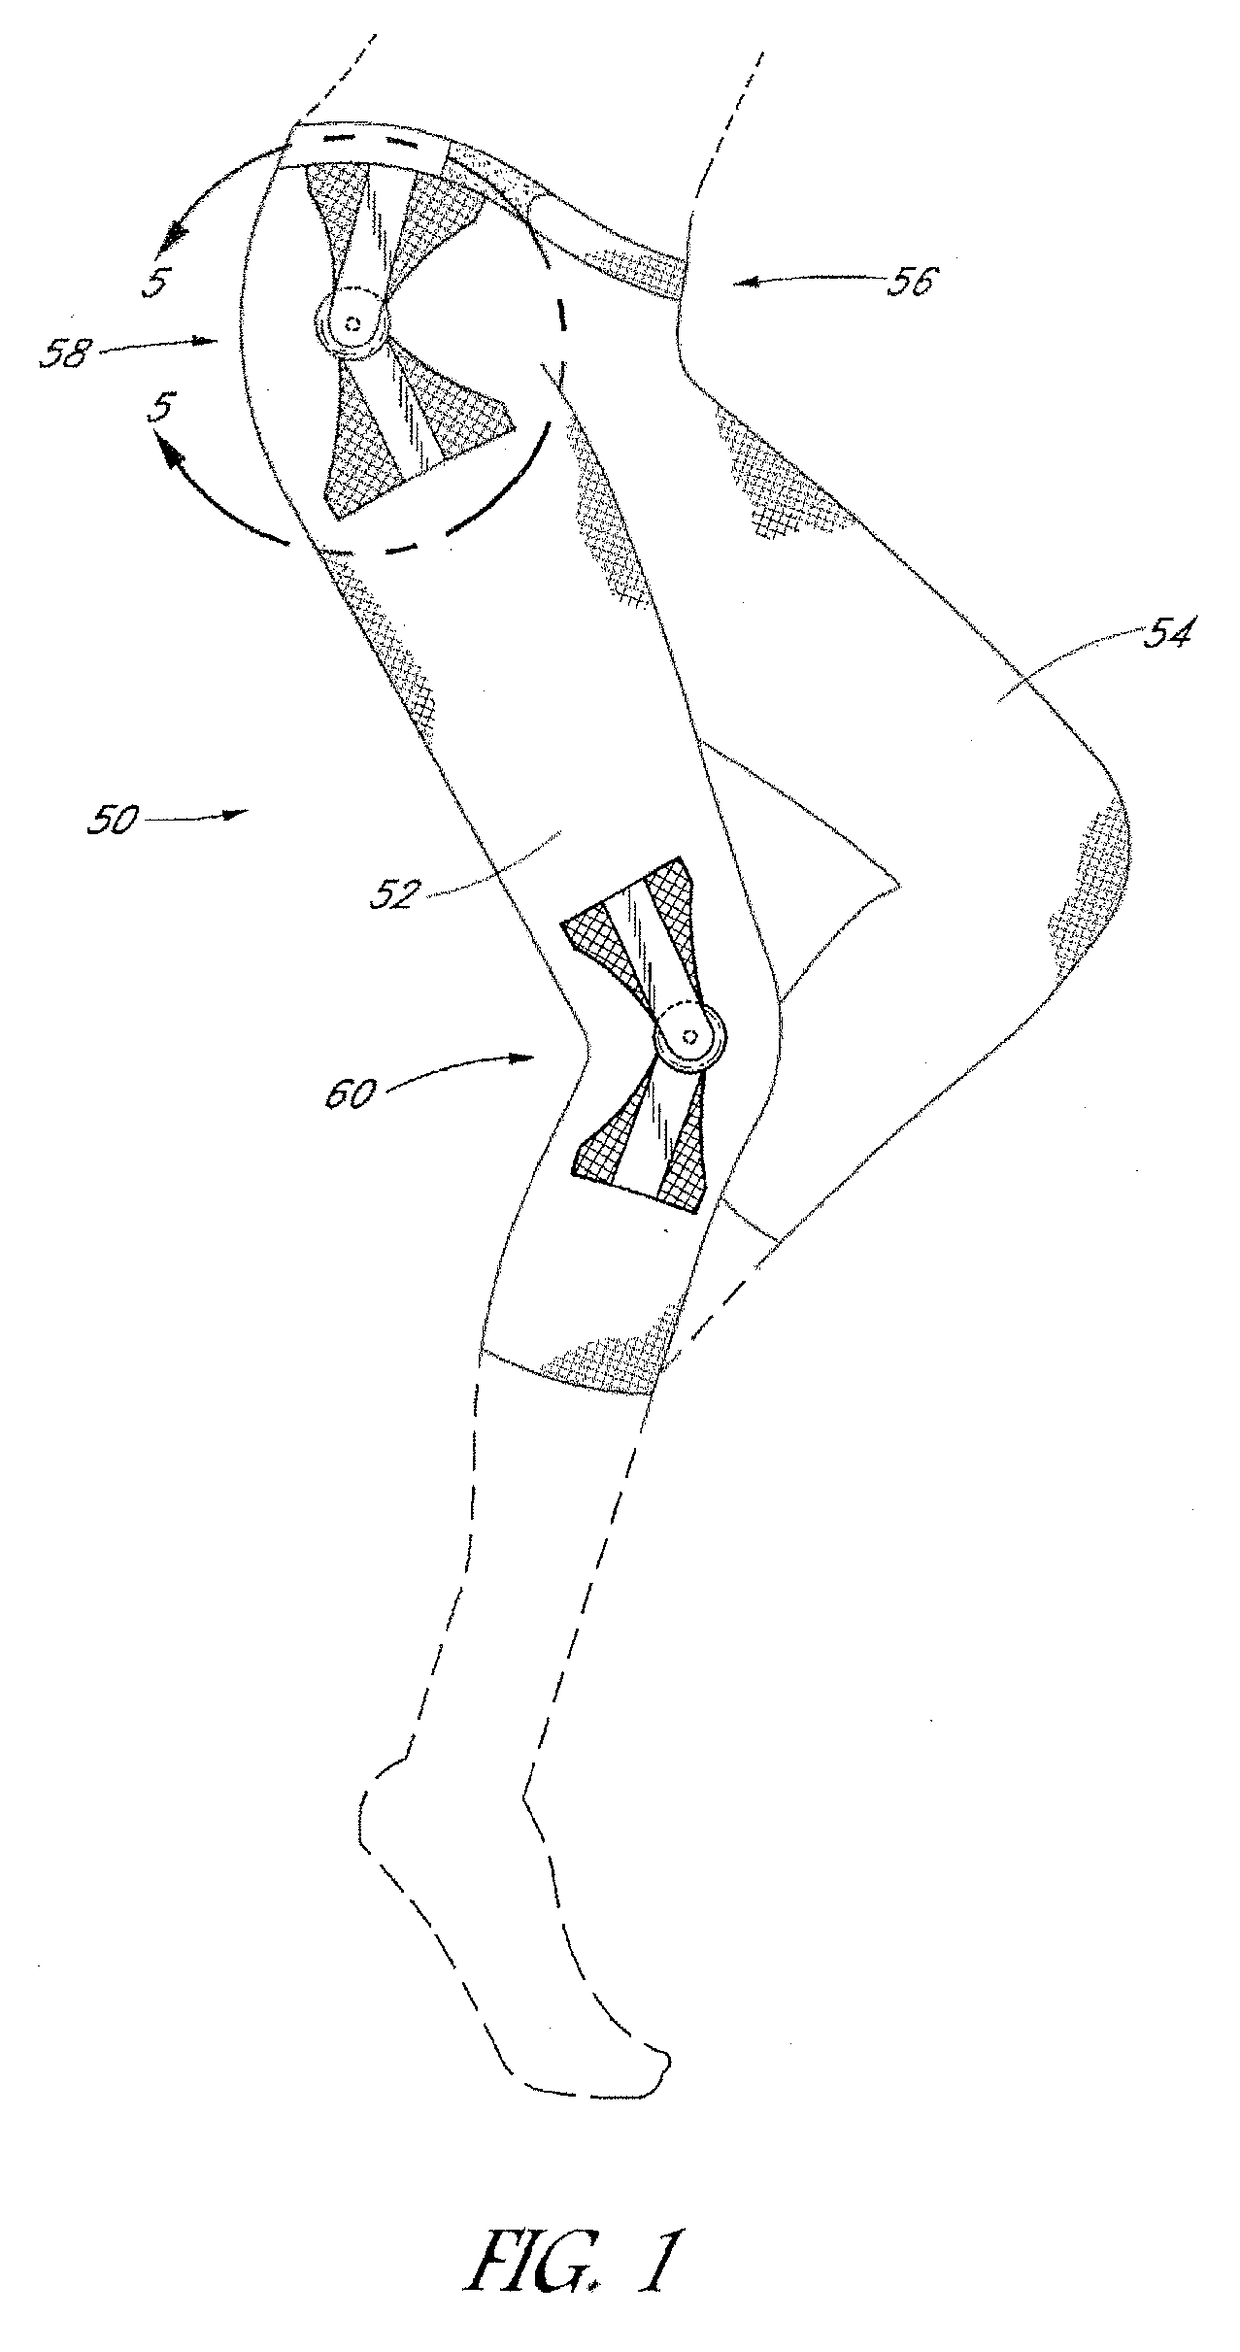 Wearable resistance device with power monitoring